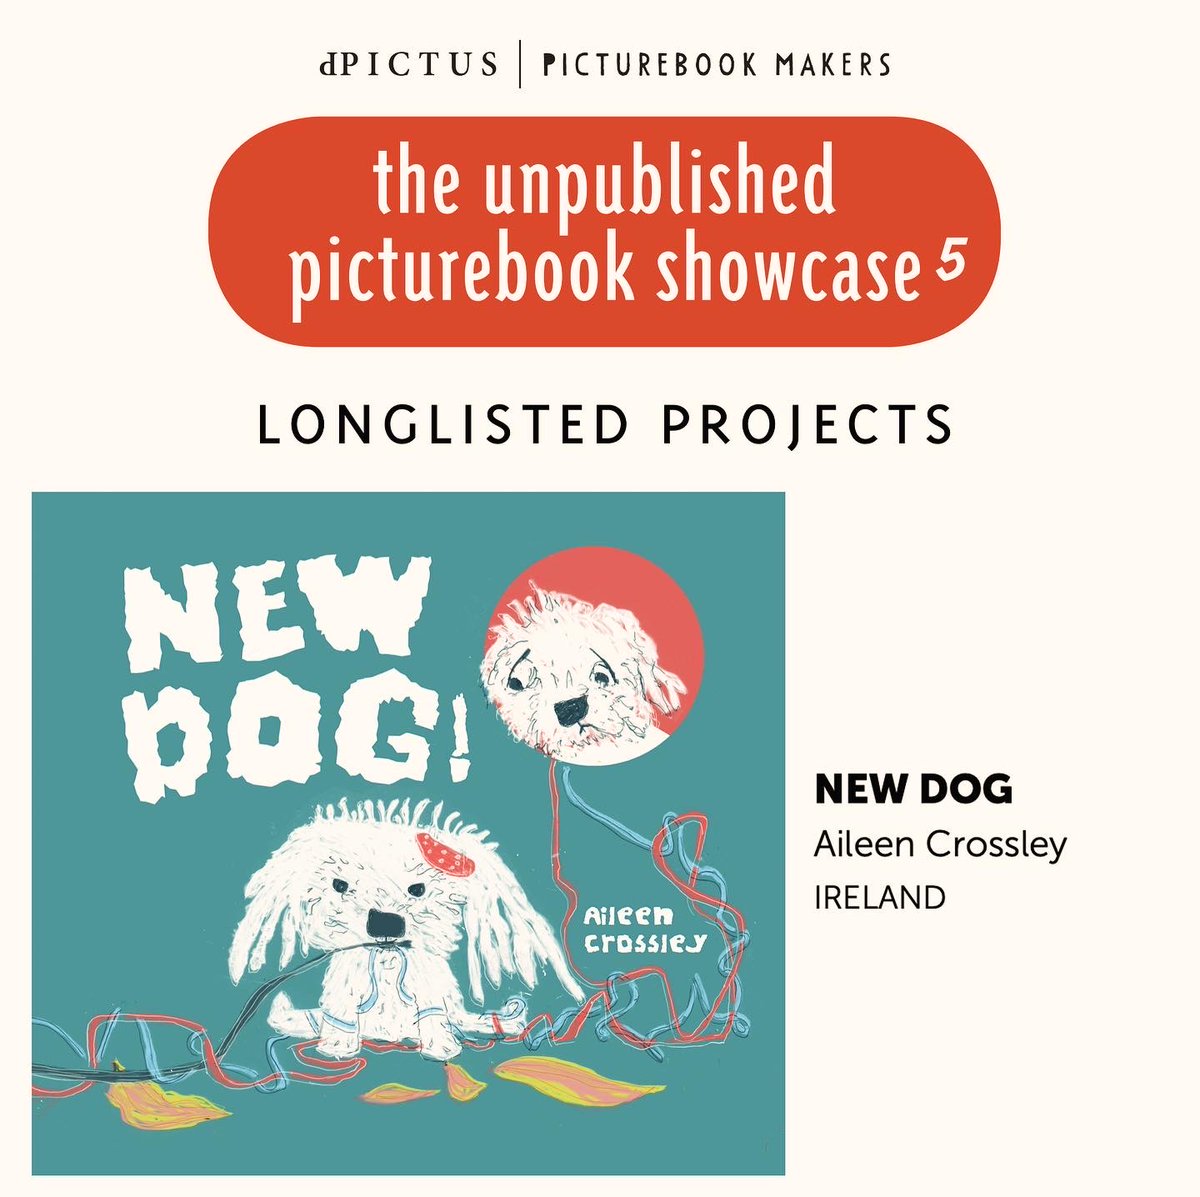 I’m so excited that both of my ‘in progress’ picturebooks were Longlisted for the dpictus unpublished picturebook showcase. ☘️🇮🇪 Both books were developed as part of my illustration masters degree at Falmouth. @FalmouthUni Thank you @pbookmakers #picturebooks #childrensbooks